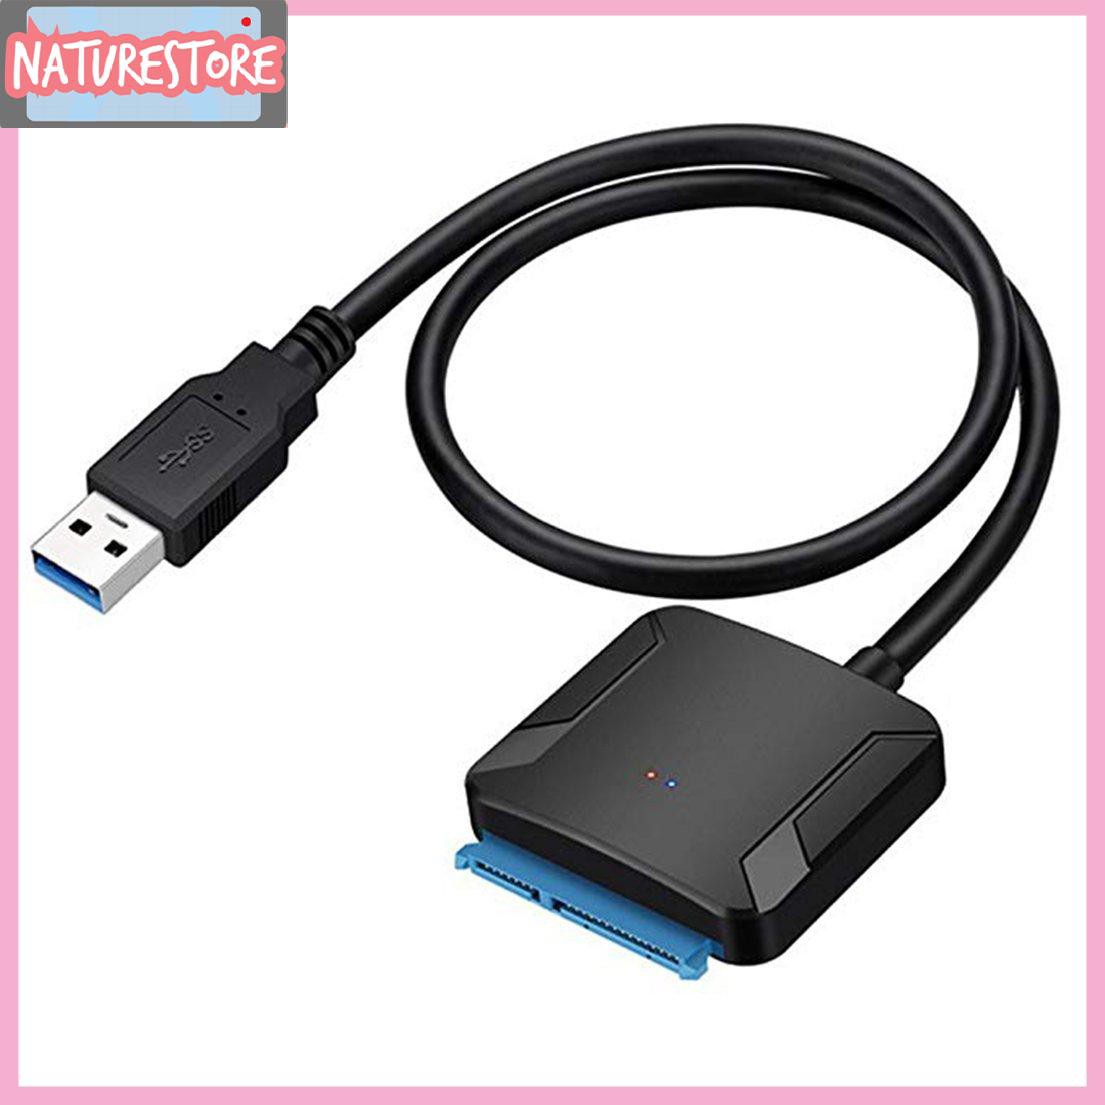 [NTS] Cable USB 3.0 to 2.5"/3.5" IDE SATA Hard Drive Adapter HDD Transfer Converter